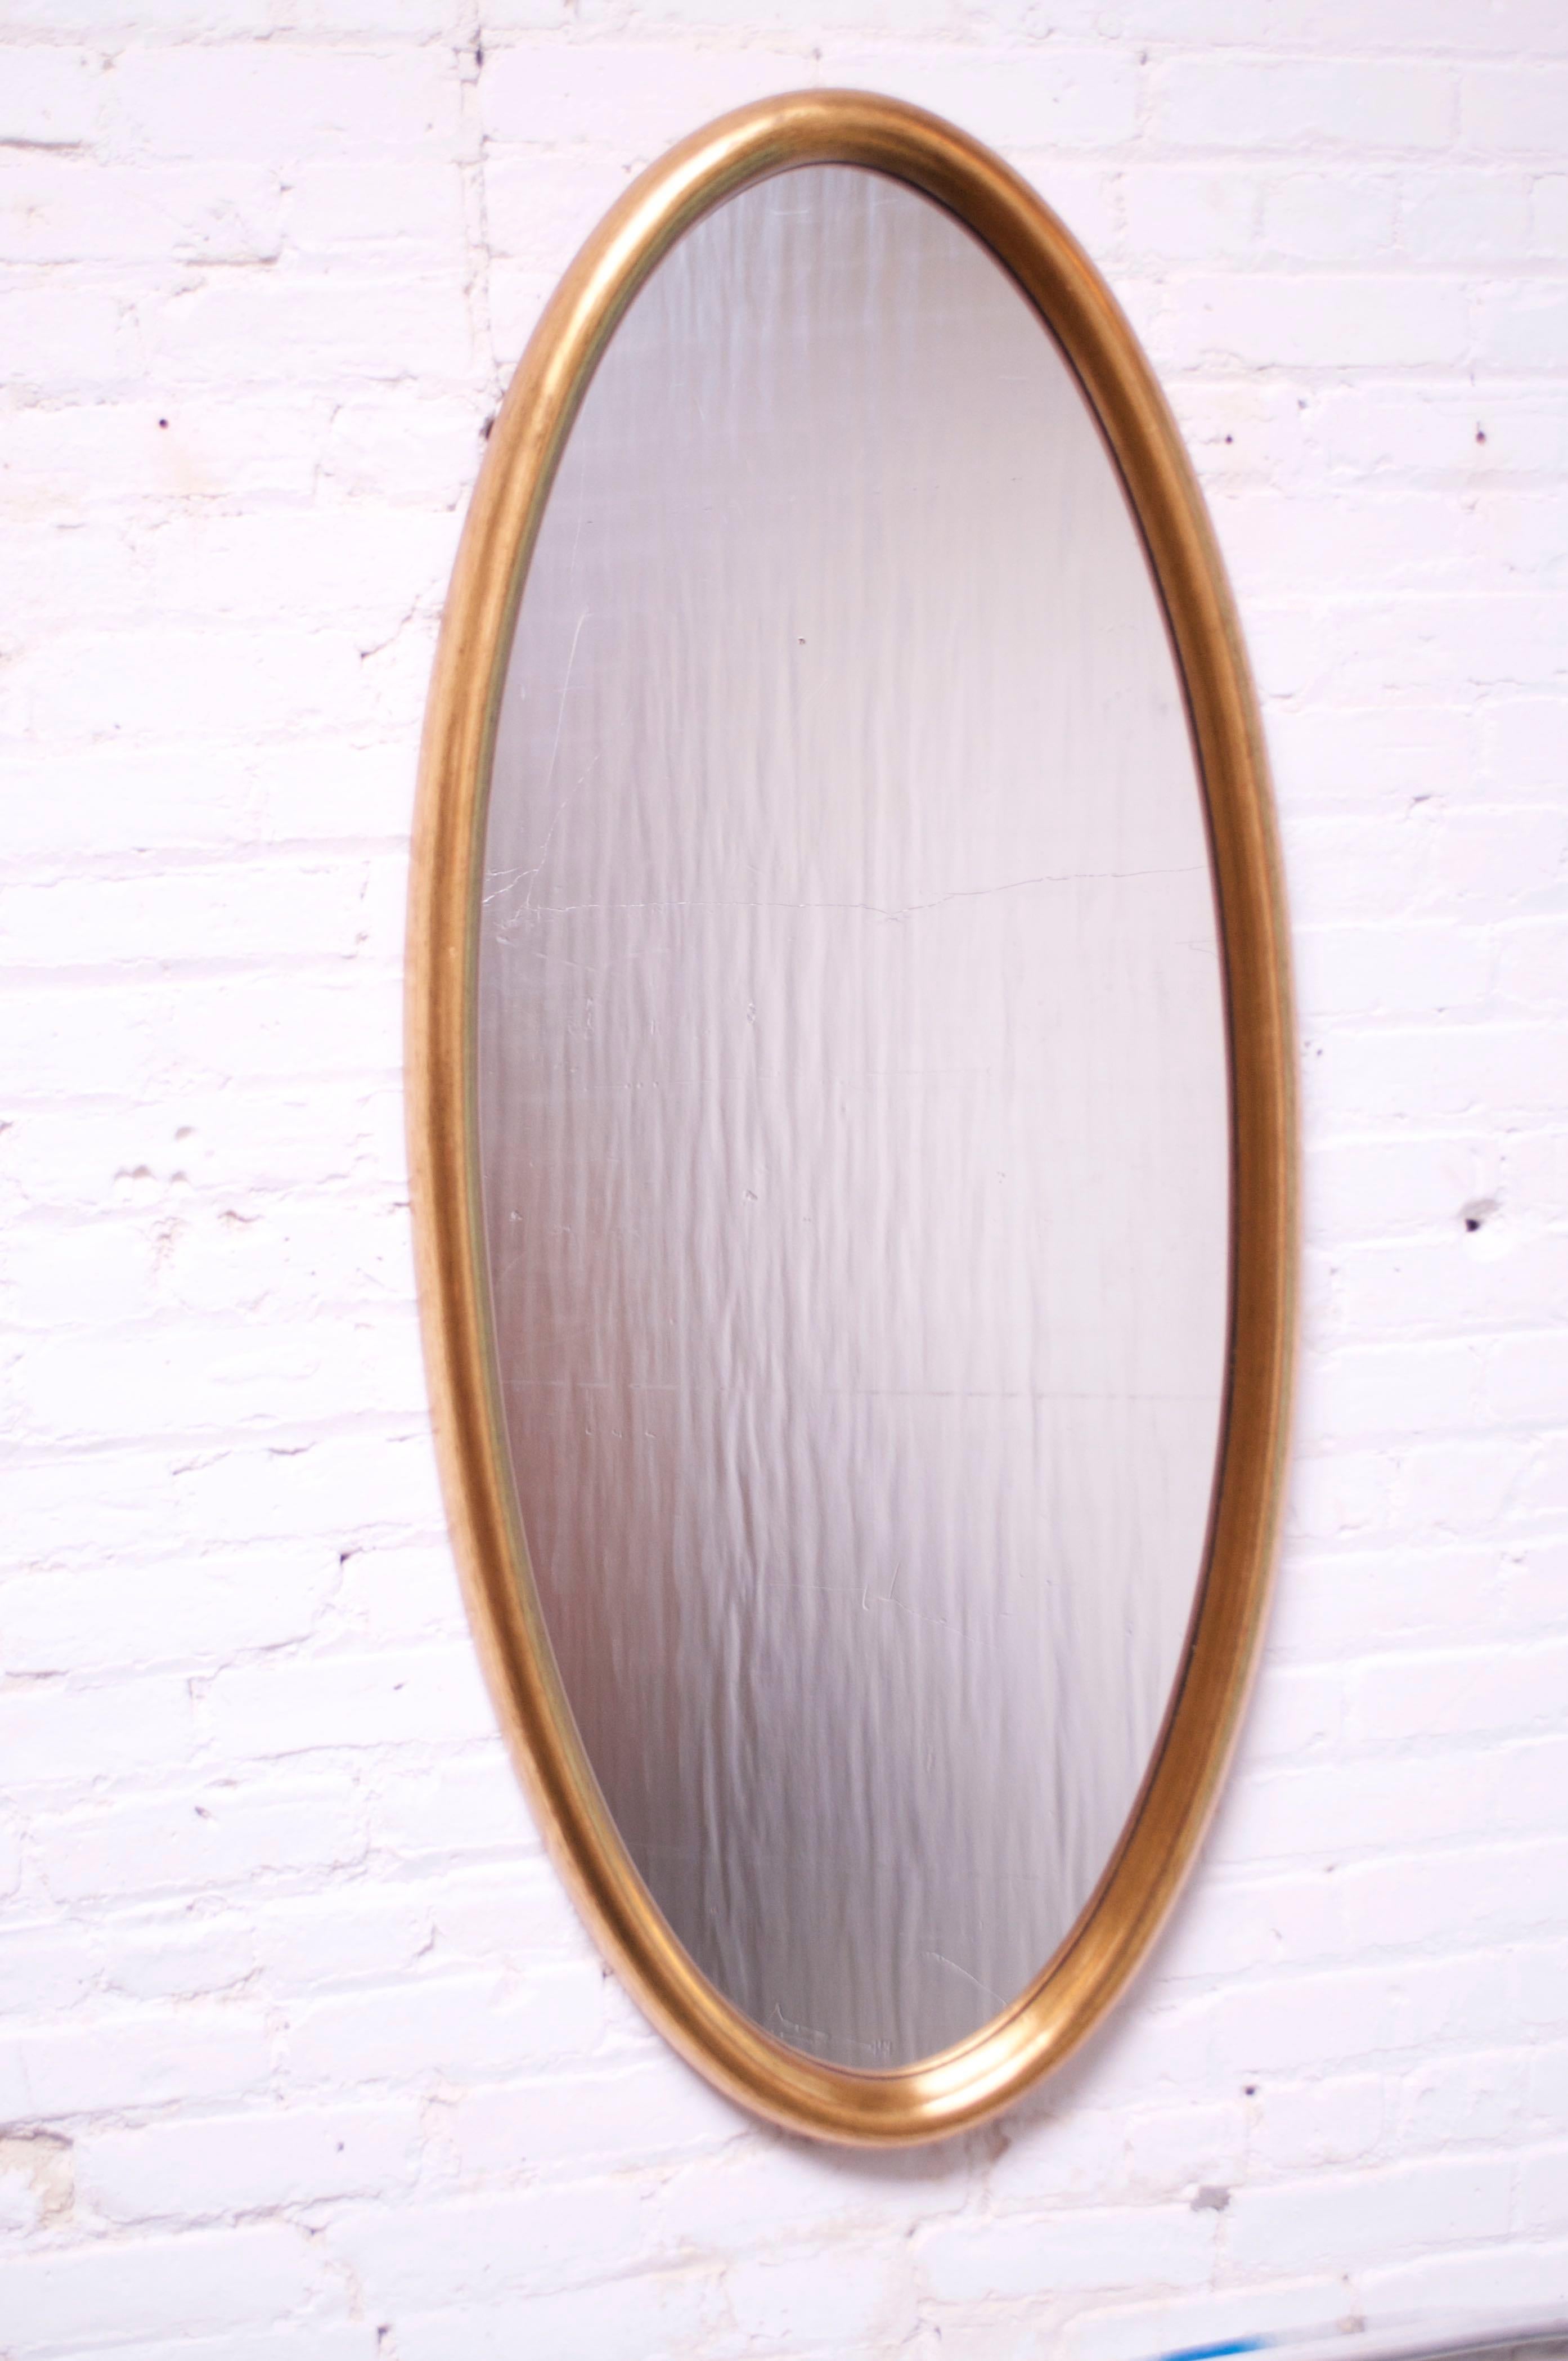 This oval-form Labarge mirror is composed of inset glass within a deep, giltwood frame. Only minor wear to the gilt, and the glass is clean. Overall, excellent, vintage condition.